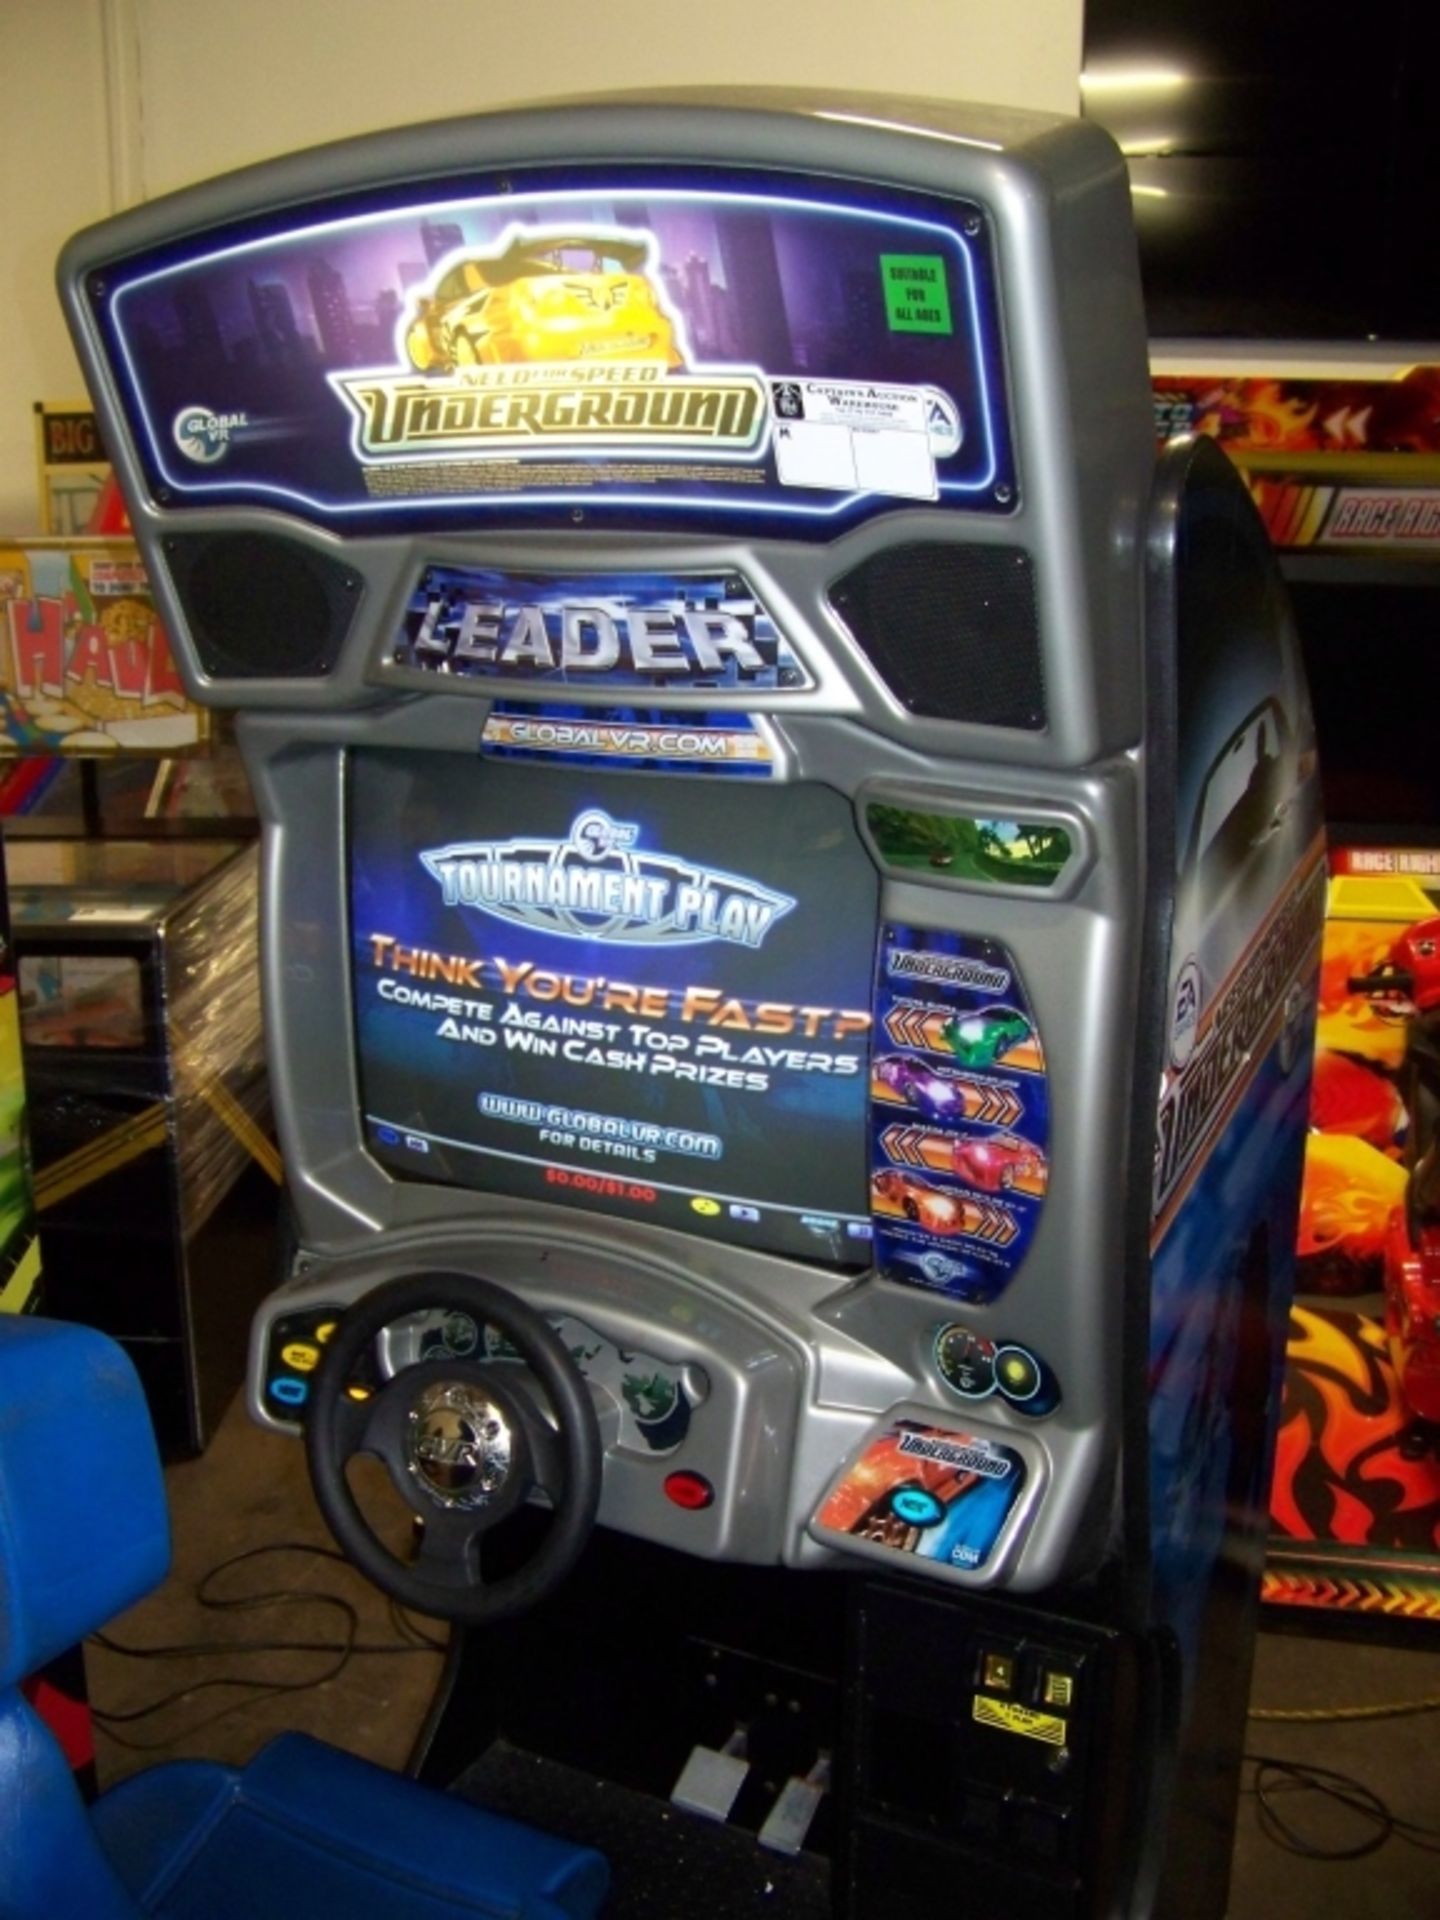 NEED FOR SPEED UNDERGROUND RACING ARCADE GAME Item is in used condition. Evidence of wear and - Image 3 of 4